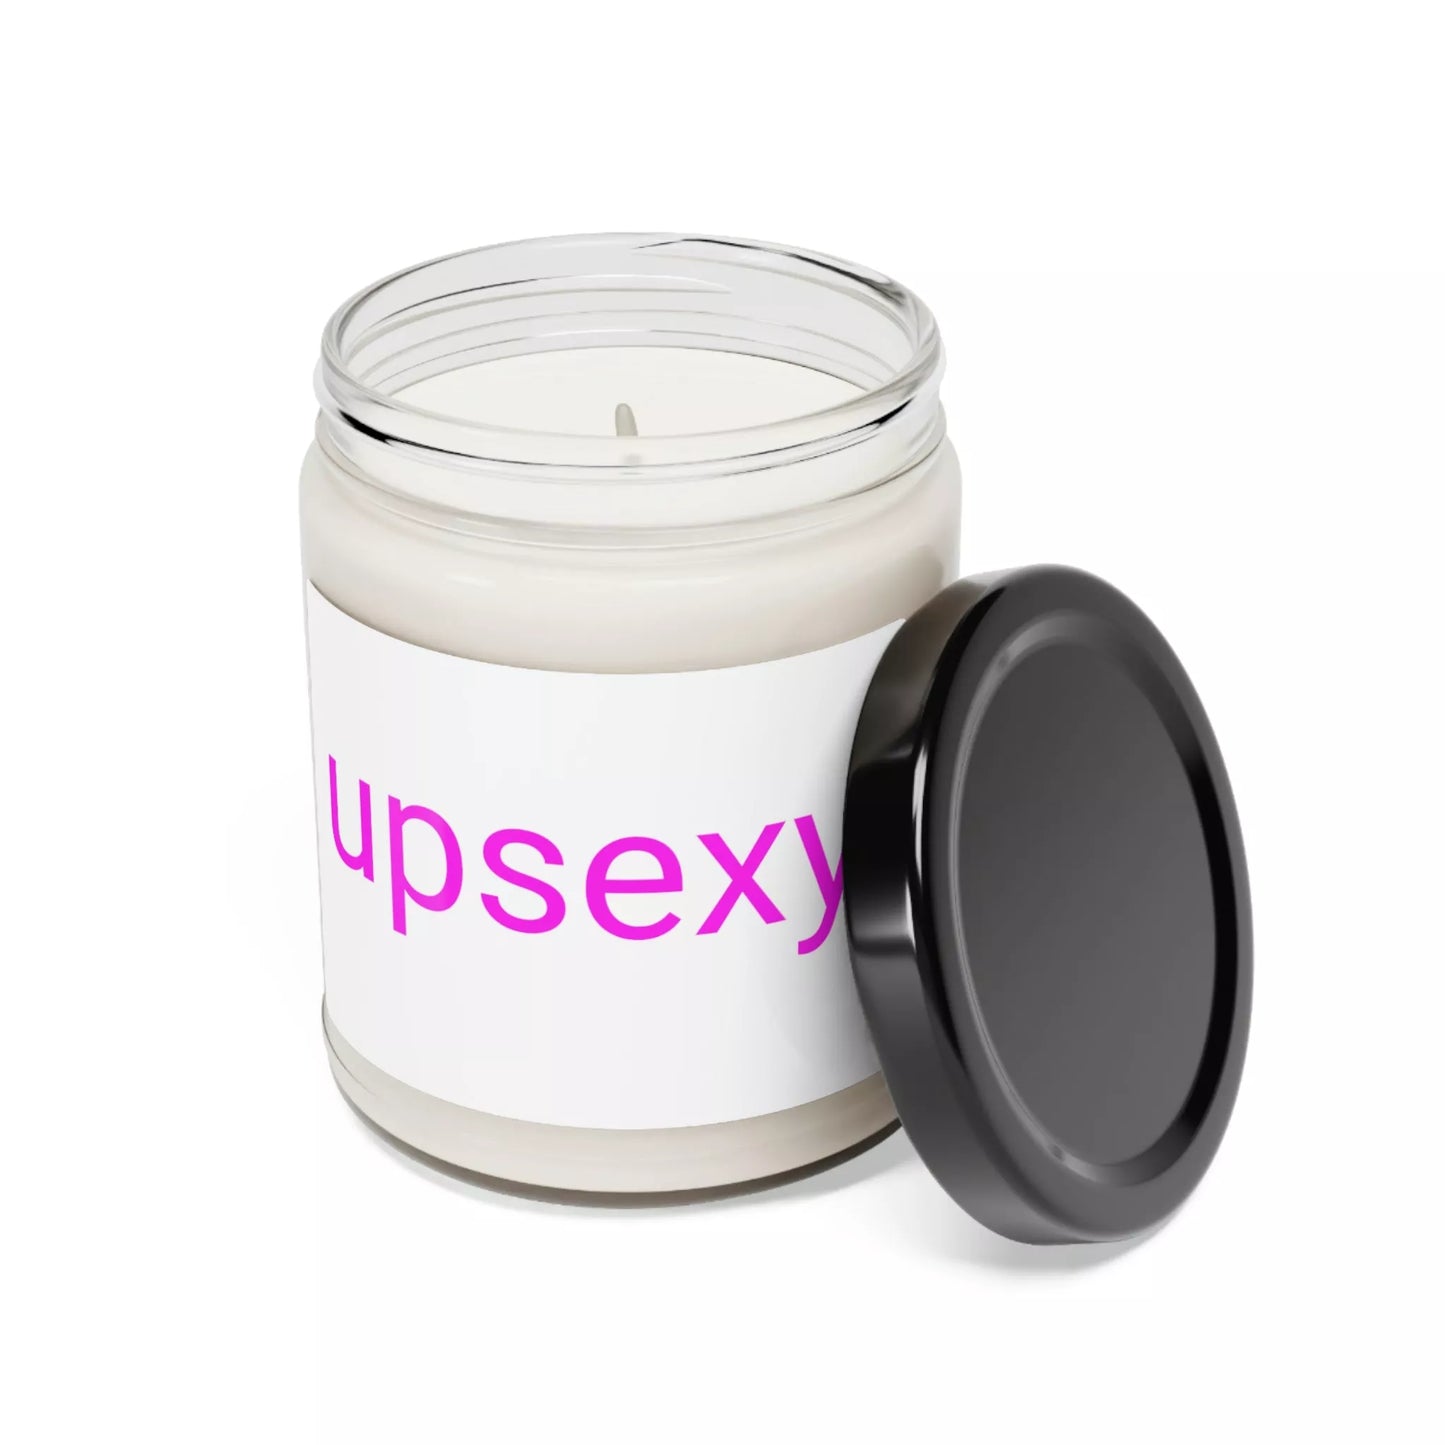 Upsexy Scented Soy Candle, 9oz